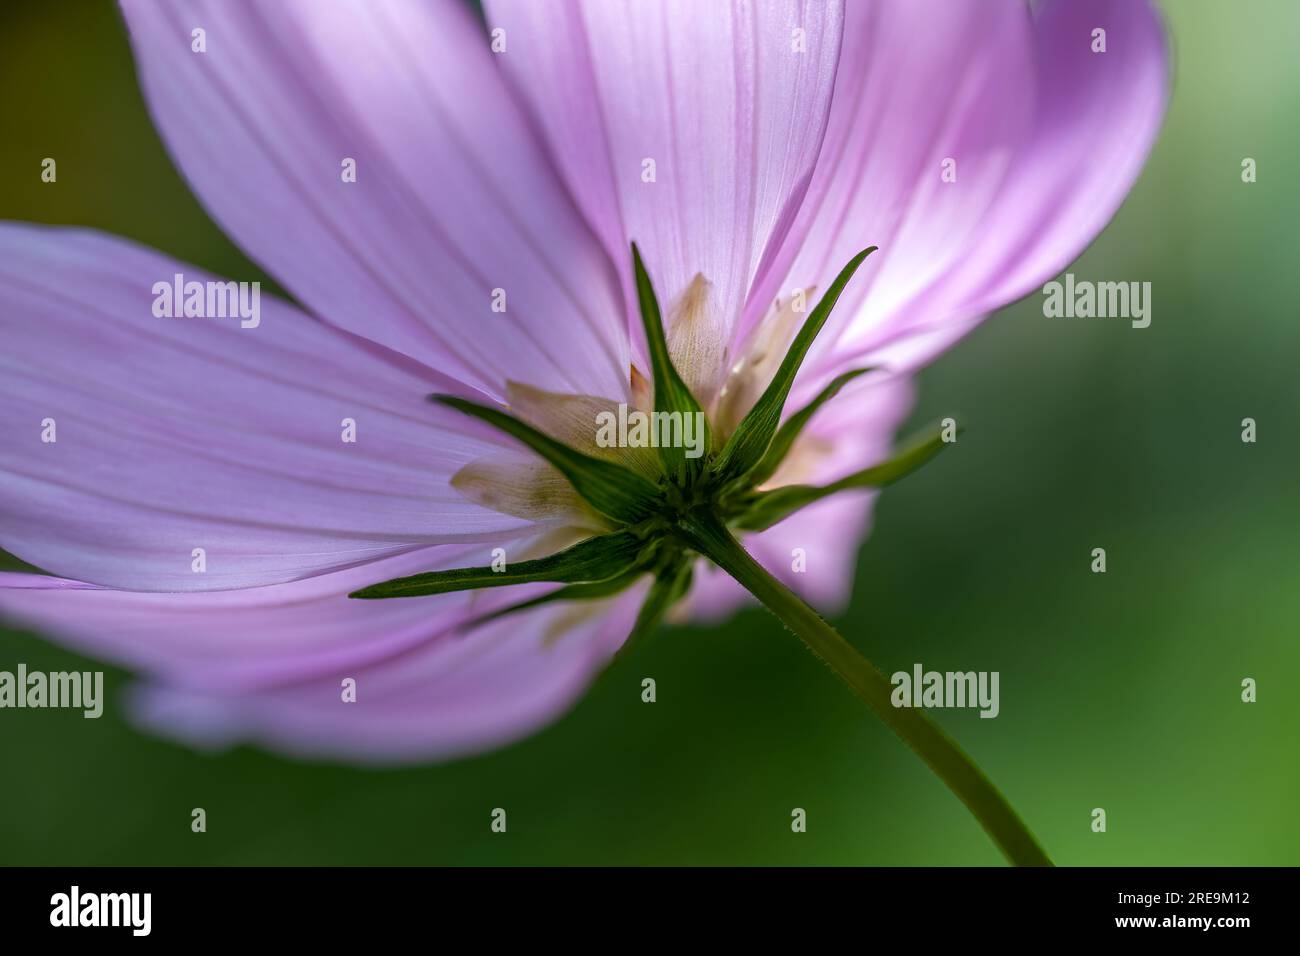 A view of the underside of a beautiful mauve coloured Dahlia flower Stock Photo